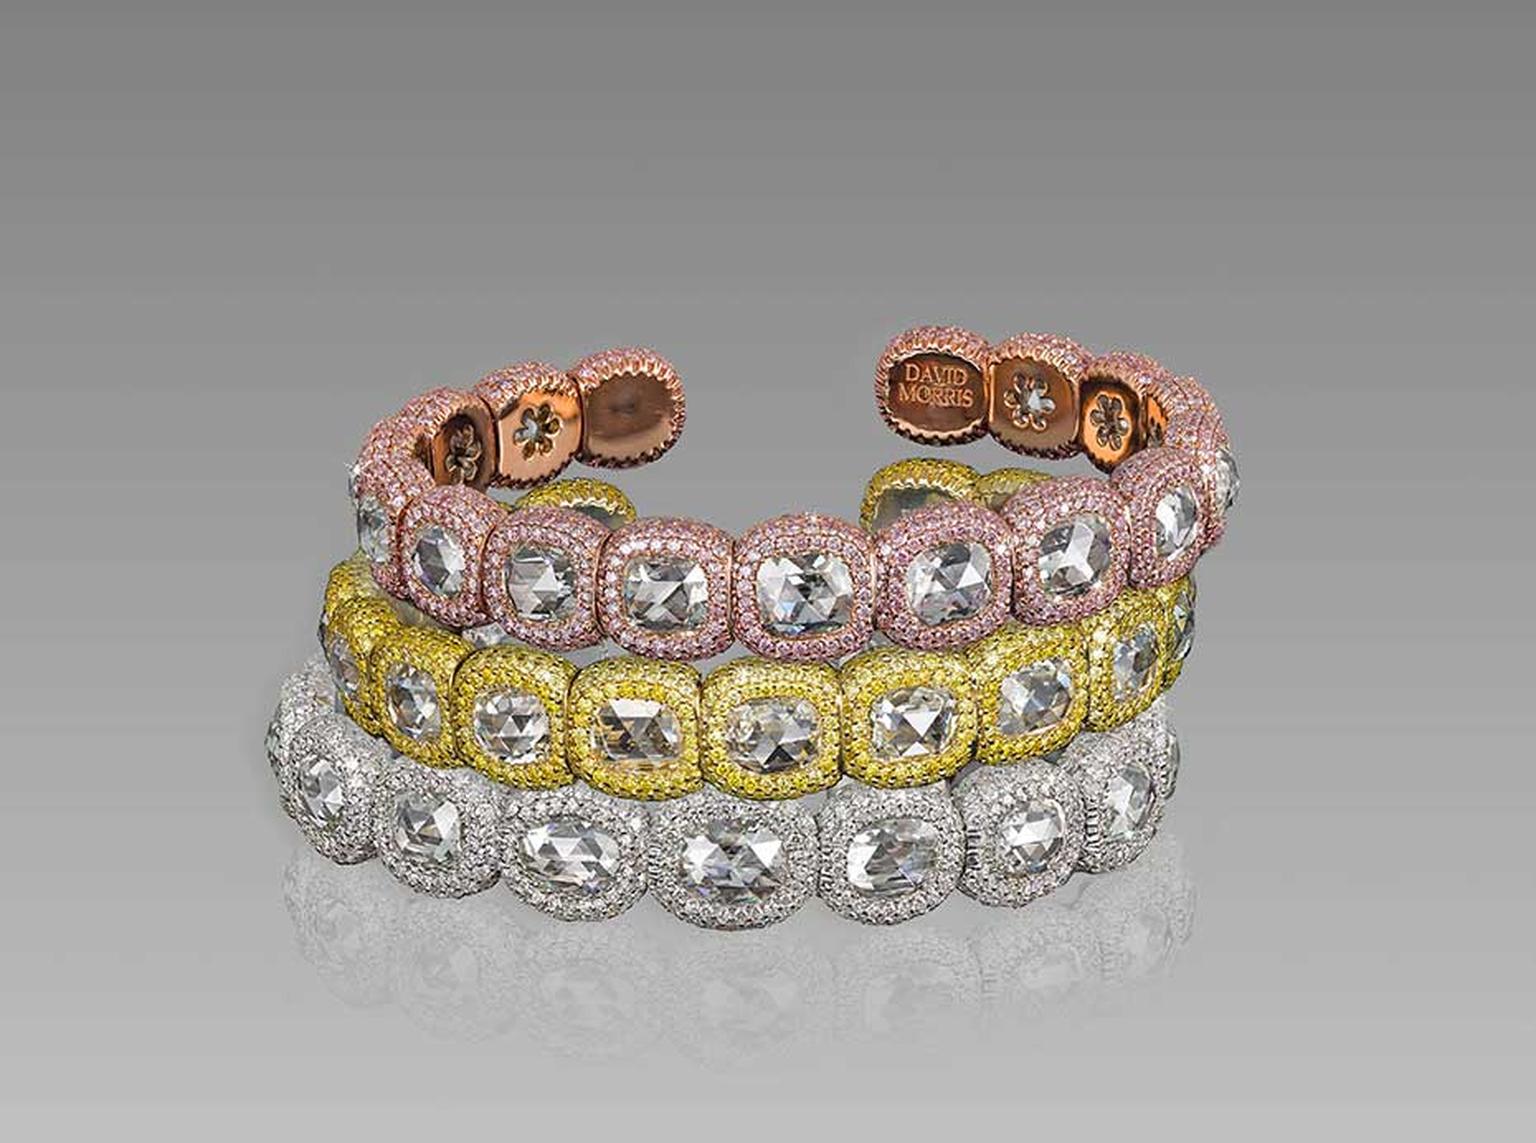 Colourful new bracelets in the David Morris Rose-Cut collection with pavé pink and yellow diamonds surrounding rose-cut diamonds.